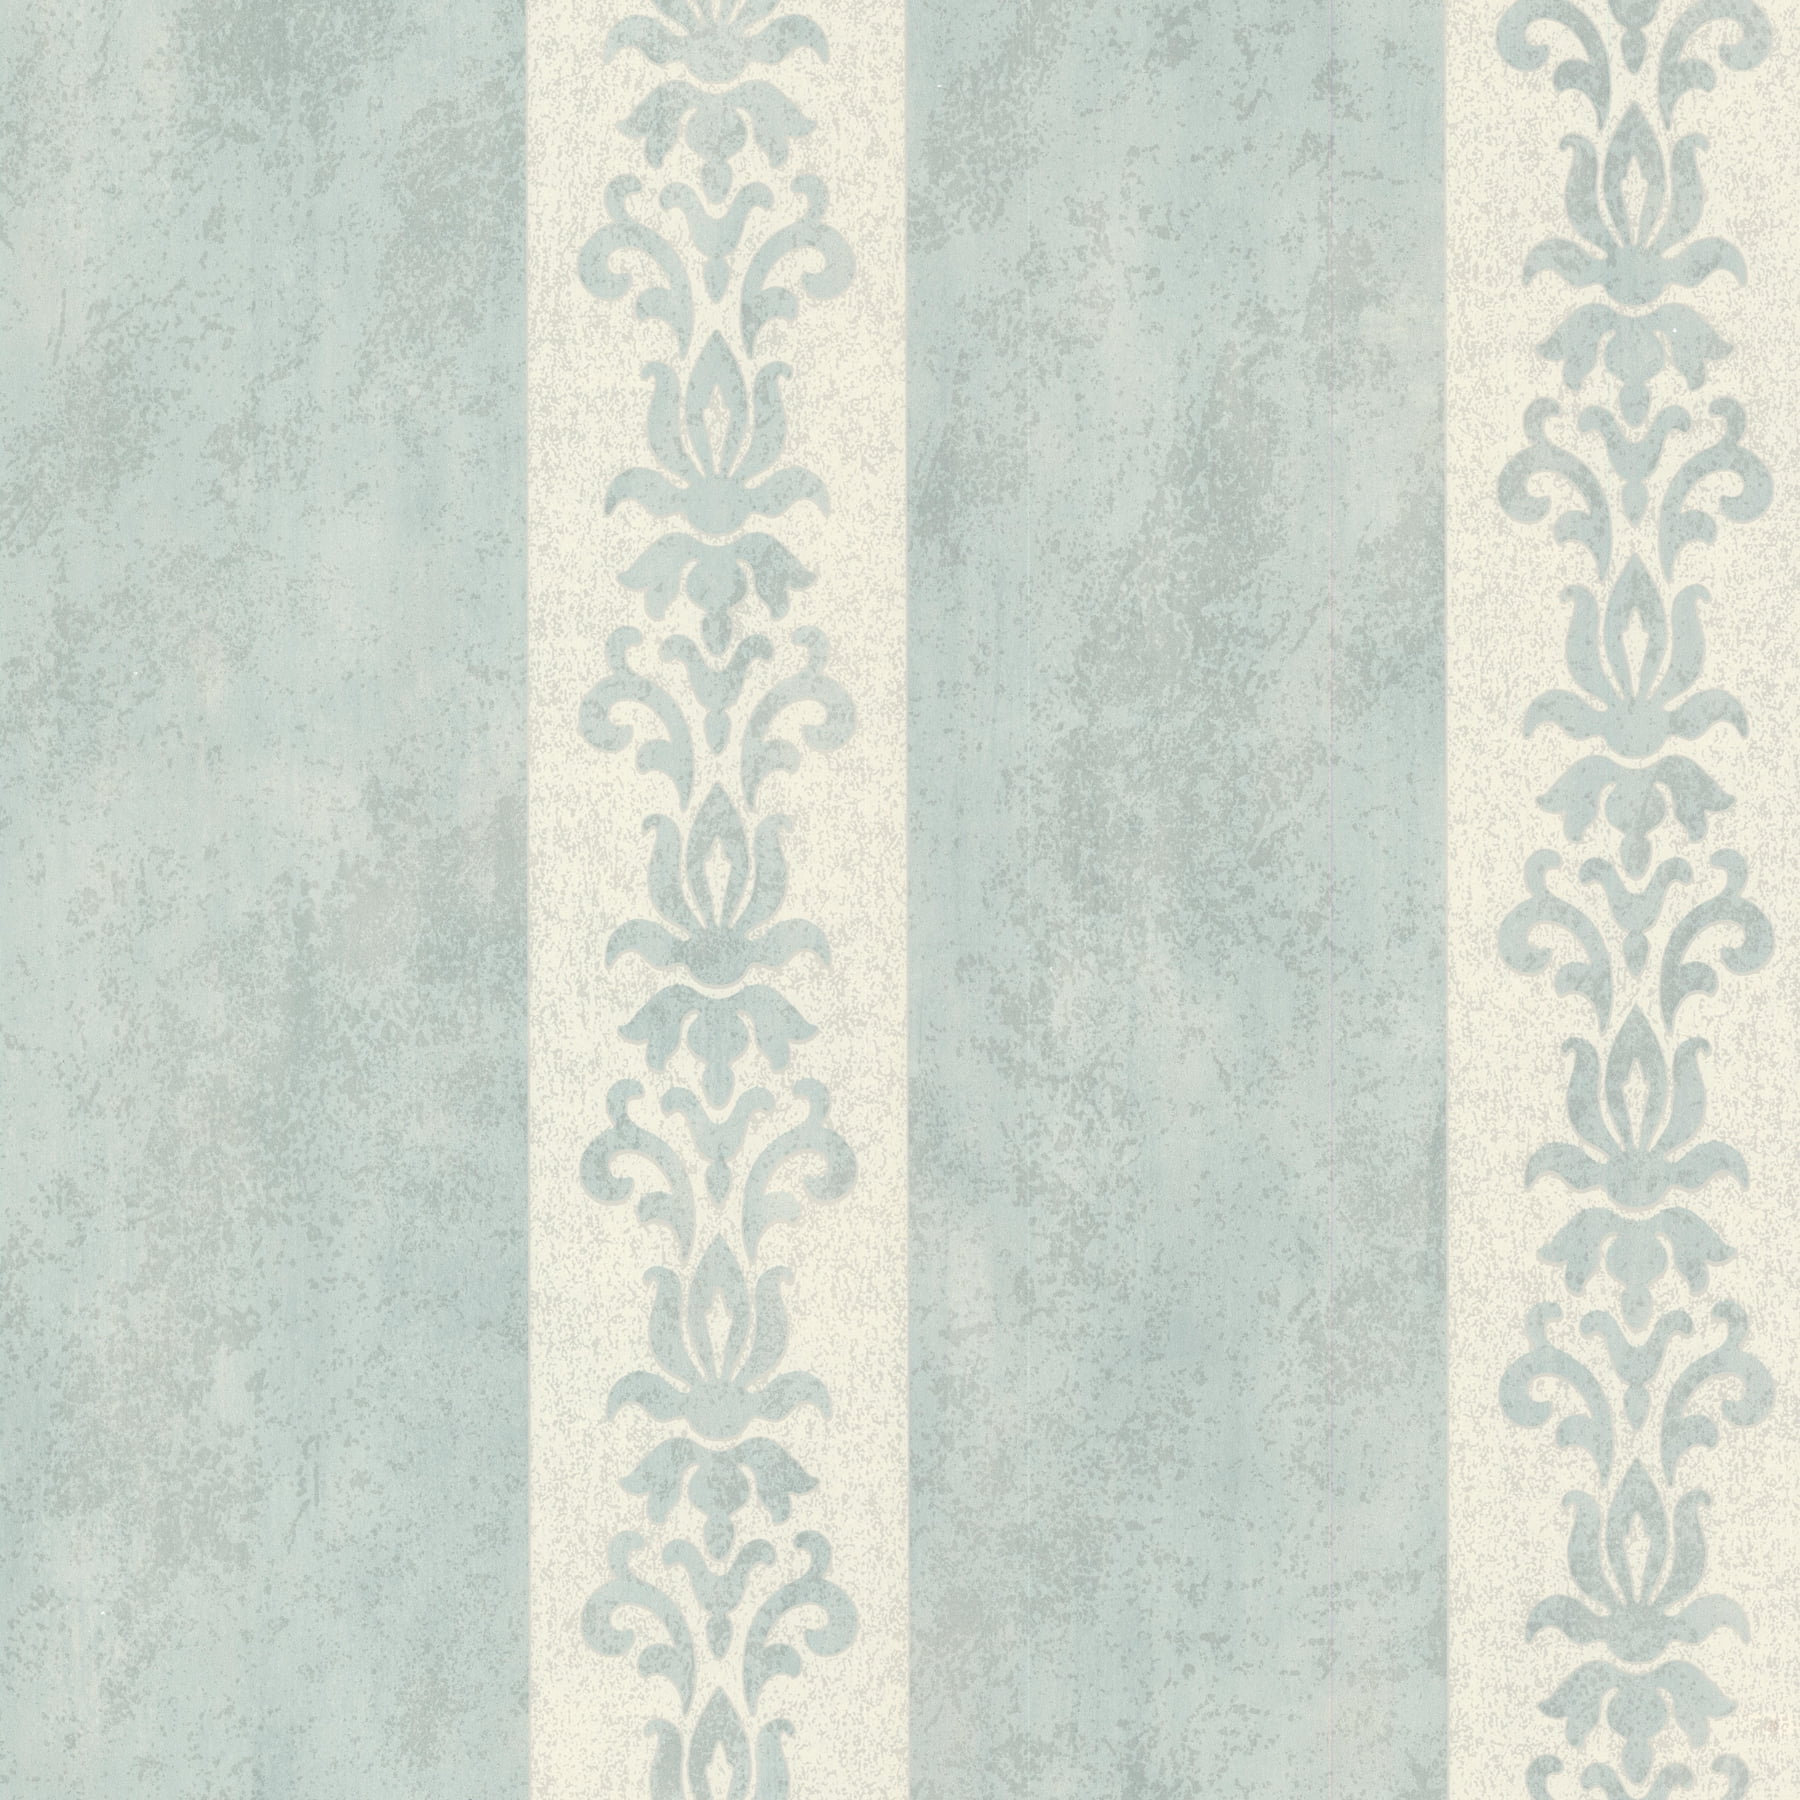 Signature Taupe Damask Wallpaper by Crown Floral Leaf Feature M1066 